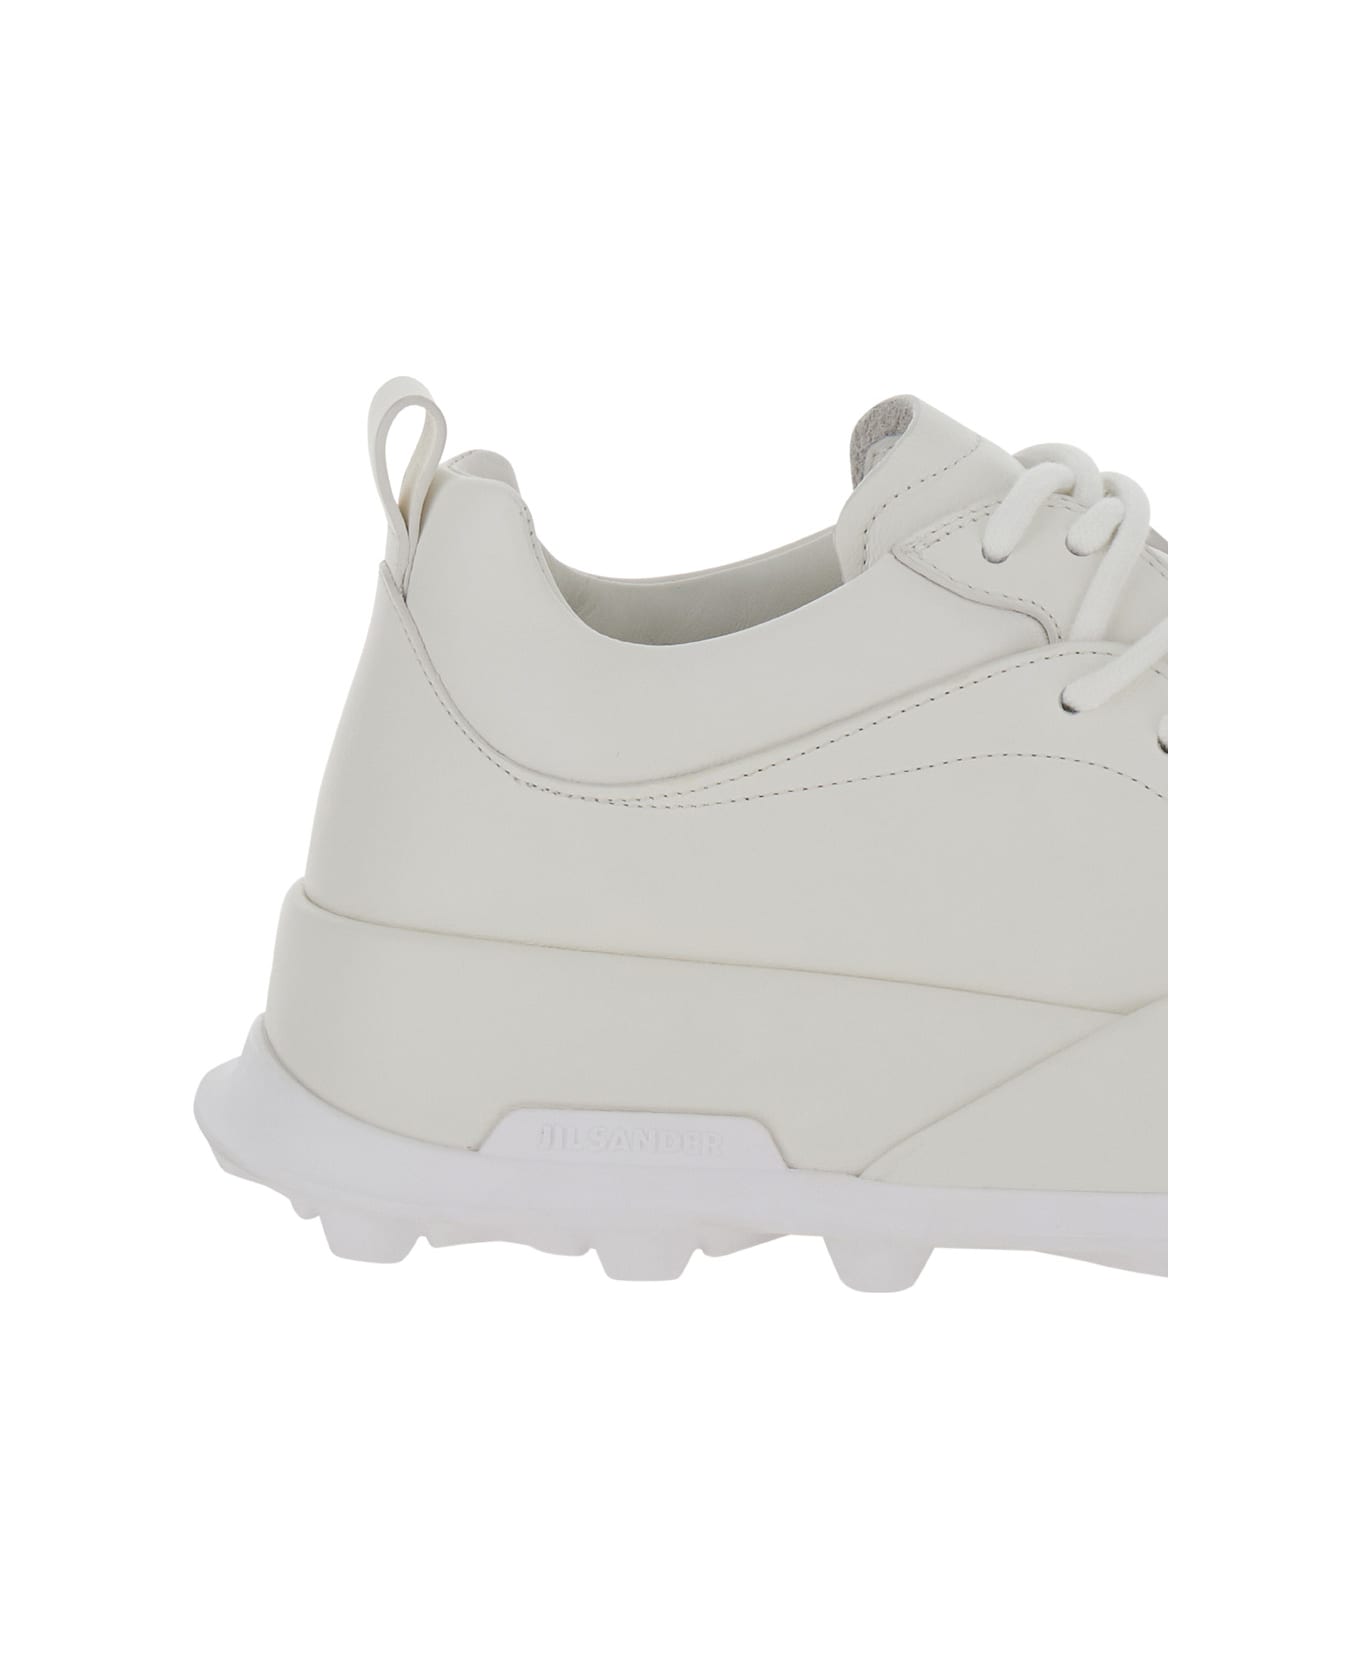 Jil Sander 'orb' White Low Top Sneakers With Cleated Sole In Leather Man - White スニーカー